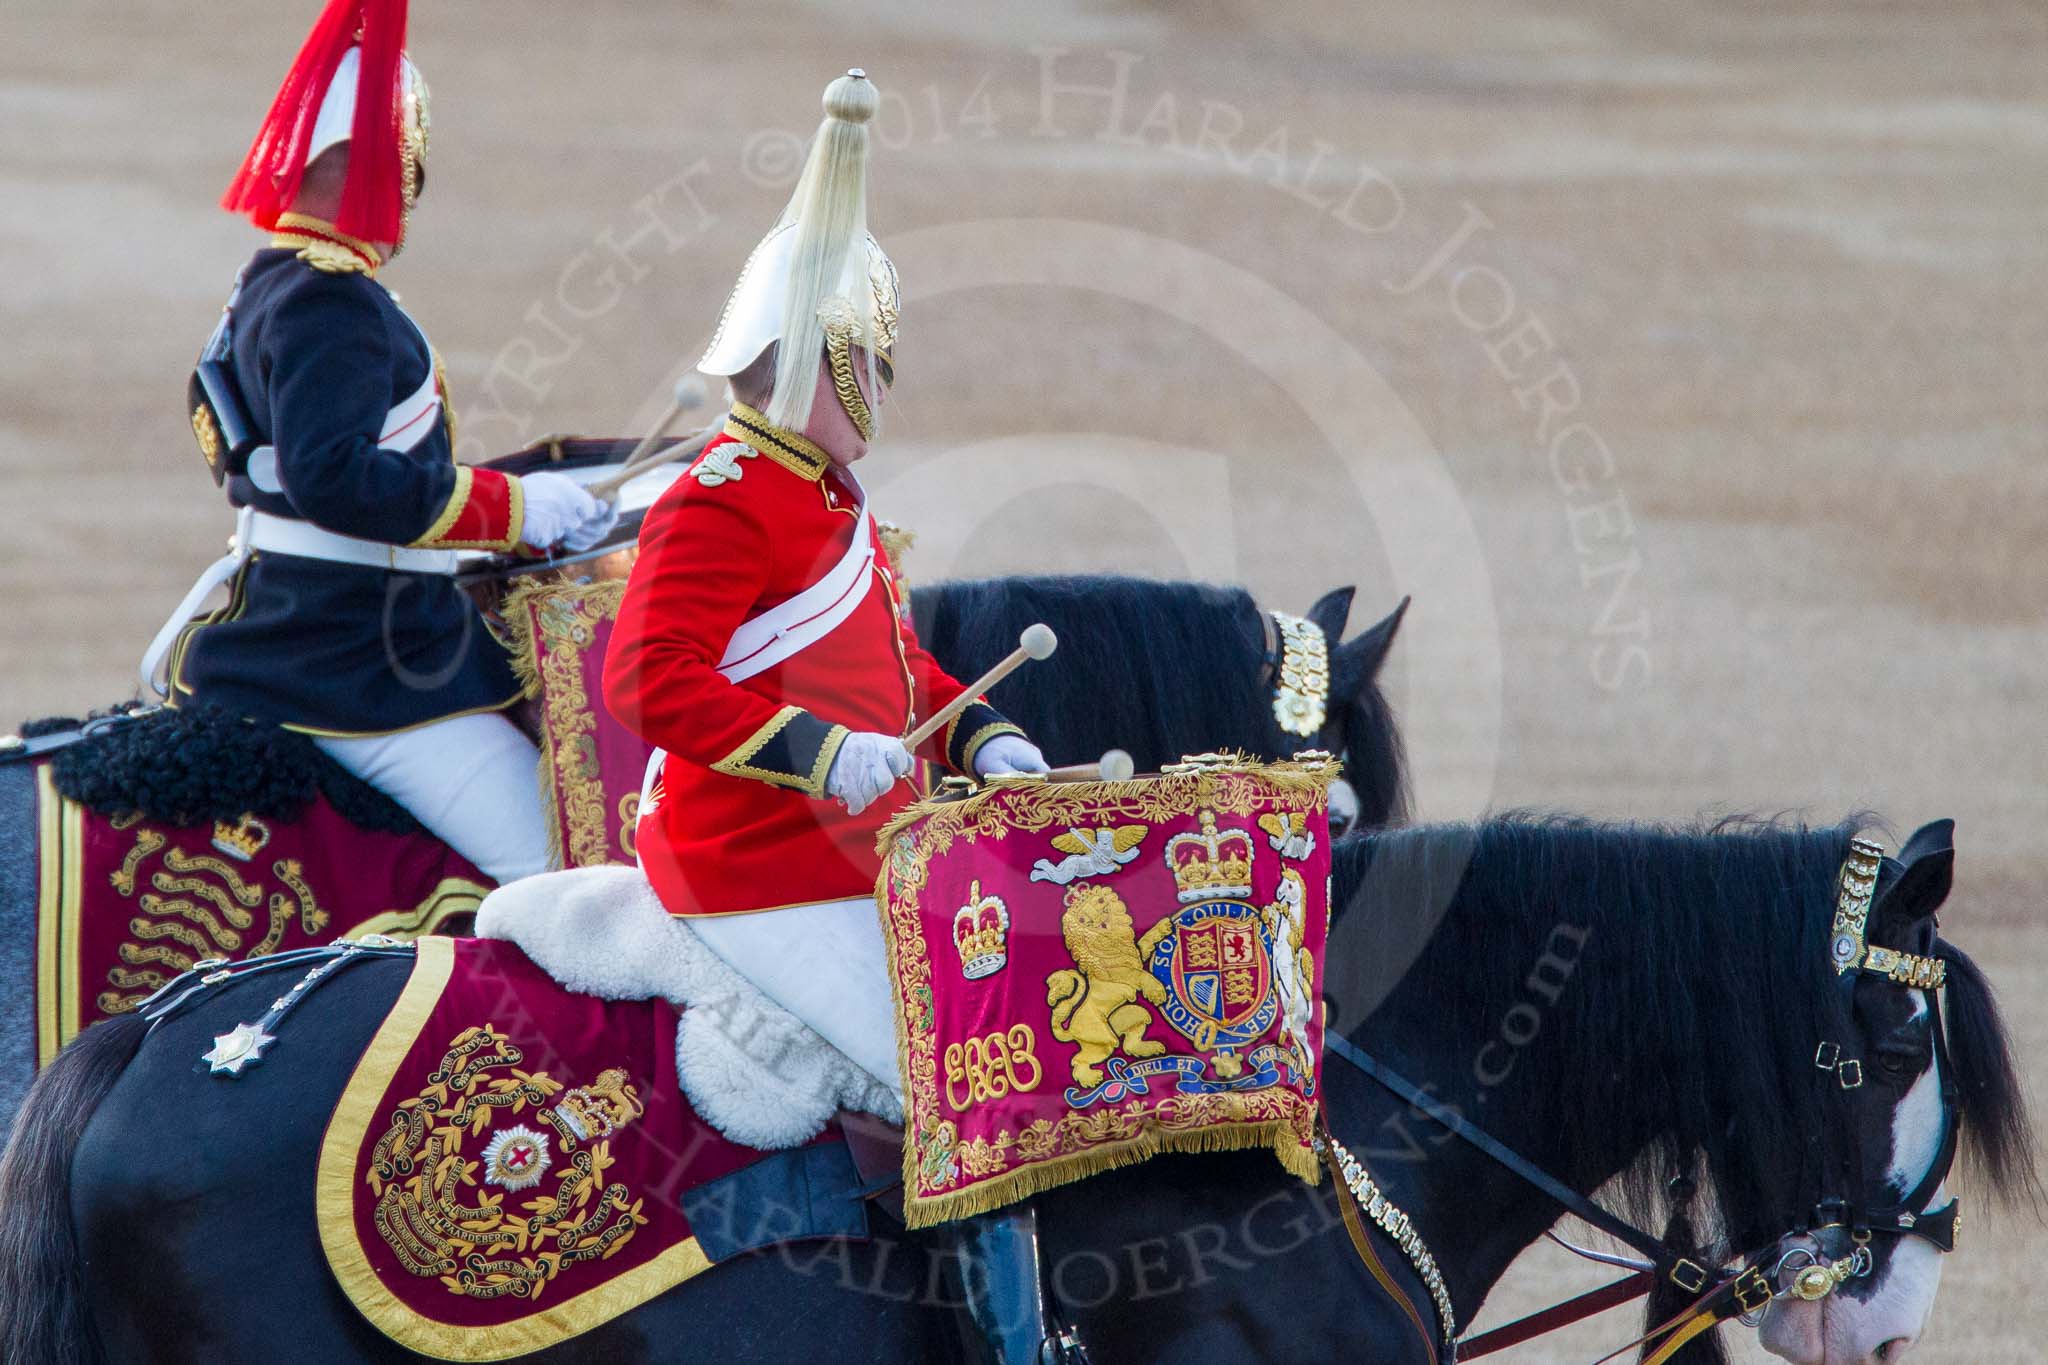 Beating Retreat 2014.
Horse Guards Parade, Westminster,
London SW1A,

United Kingdom,
on 11 June 2014 at 20:25, image #101